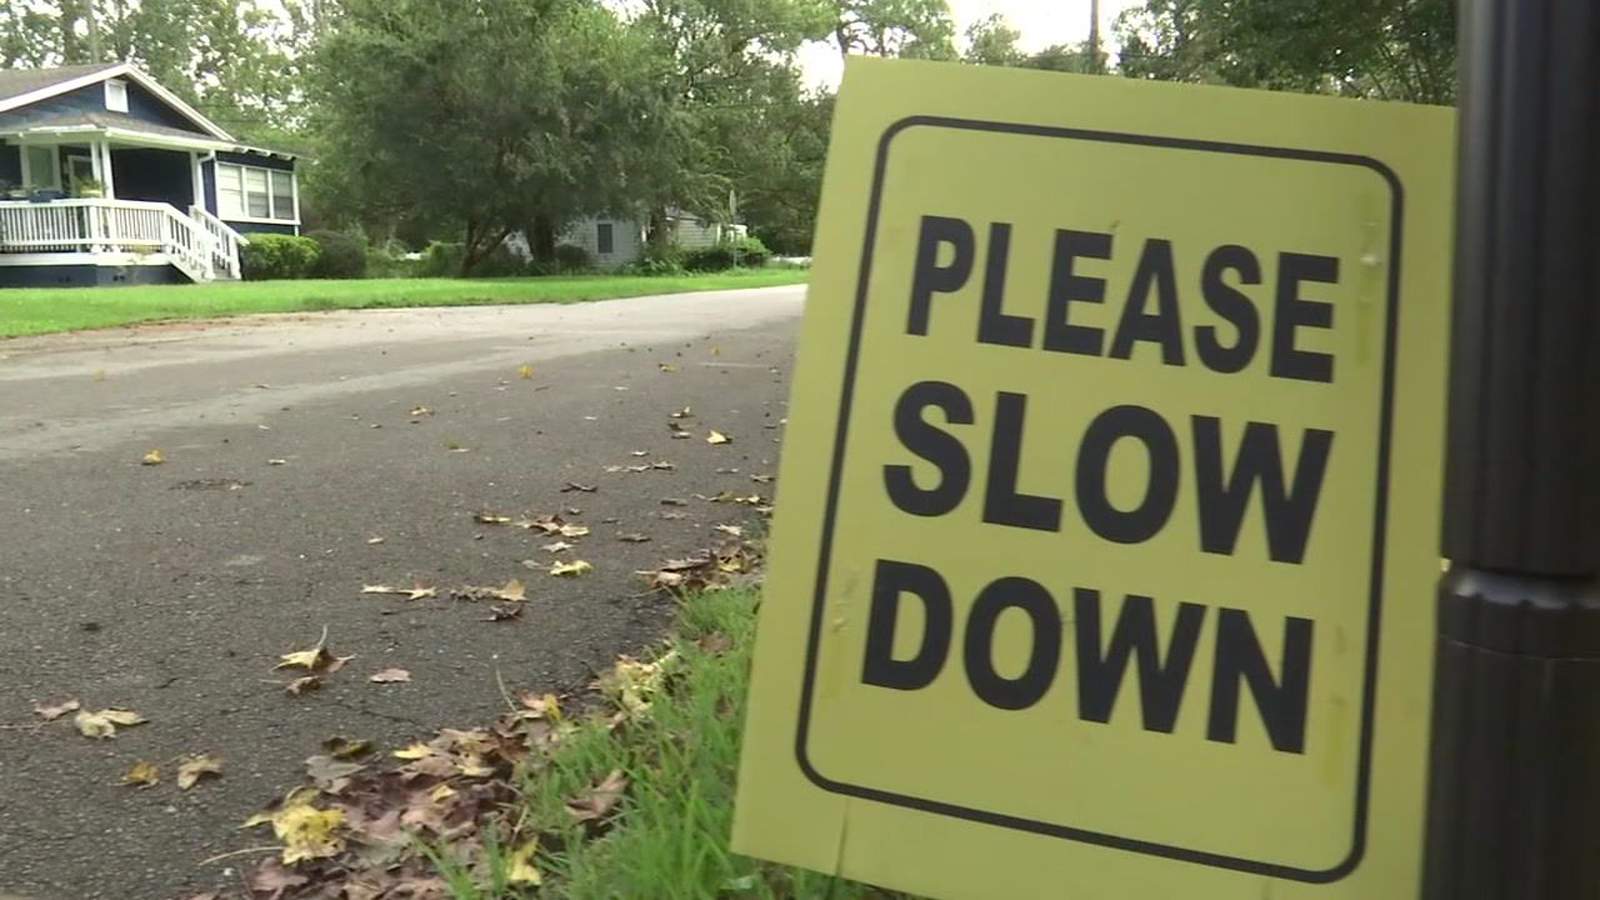 South Riverside residents want more stop signs or speed bumps